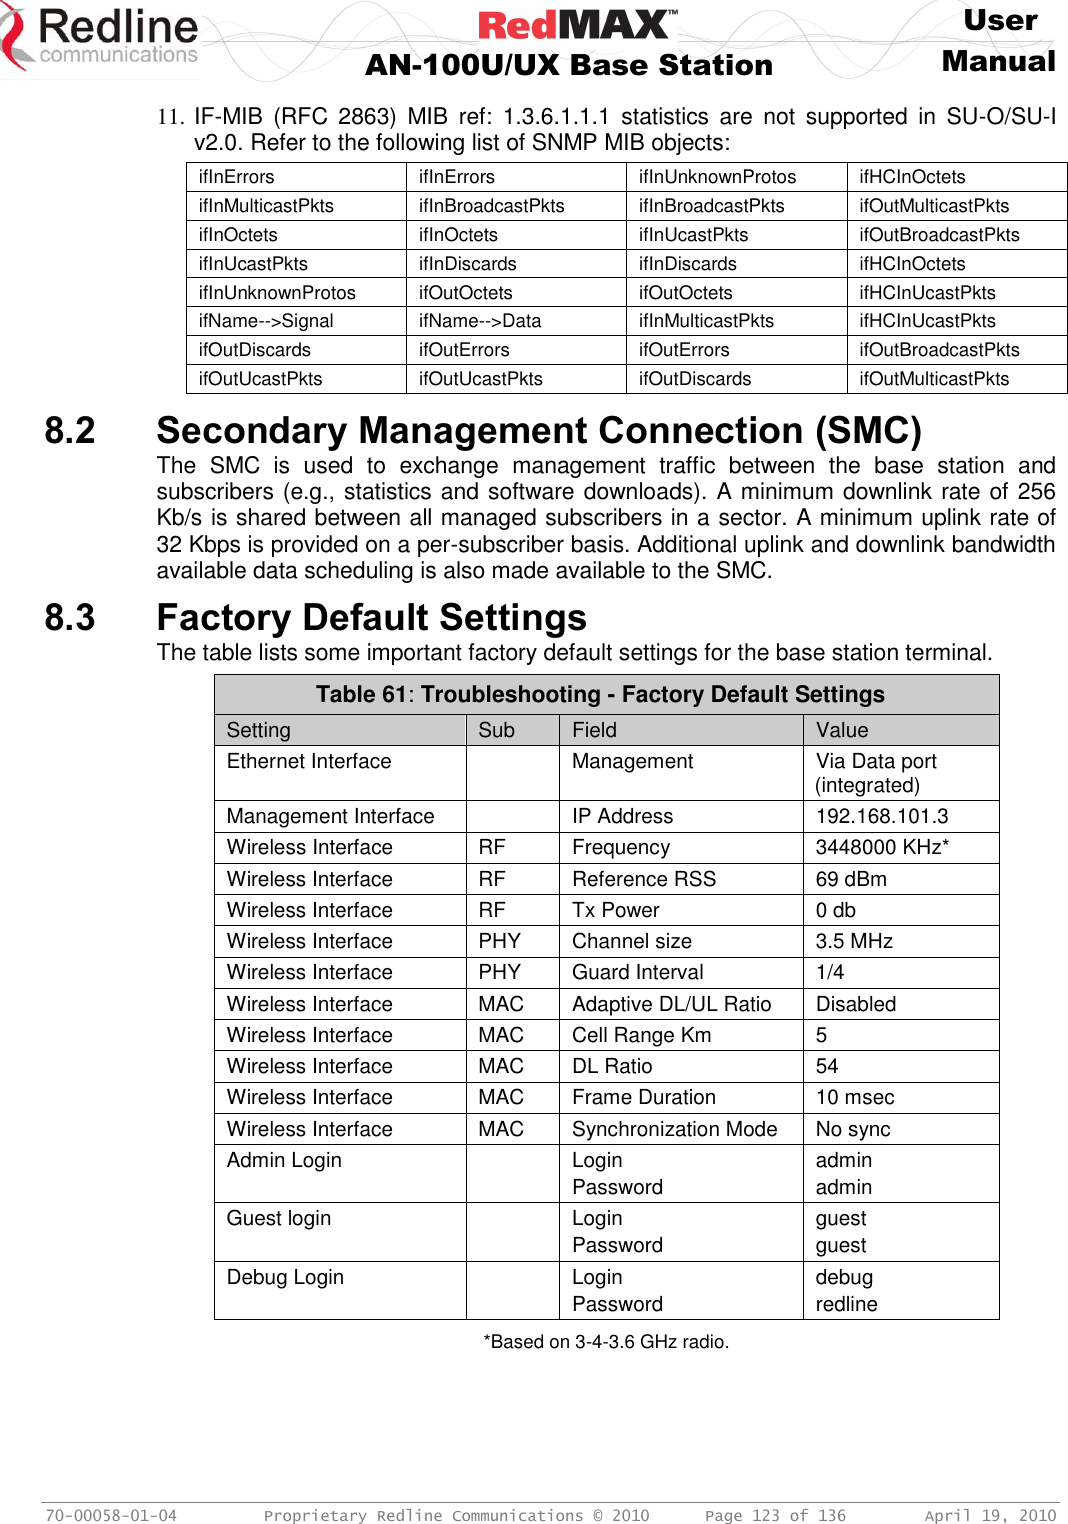     User  AN-100U/UX Base Station Manual   70-00058-01-04  Proprietary Redline Communications © 2010   Page 123 of 136  April 19, 2010 11. IF-MIB  (RFC  2863)  MIB  ref:  1.3.6.1.1.1  statistics  are  not  supported  in  SU-O/SU-I v2.0. Refer to the following list of SNMP MIB objects: ifInErrors ifInErrors ifInUnknownProtos ifHCInOctets ifInMulticastPkts ifInBroadcastPkts ifInBroadcastPkts ifOutMulticastPkts ifInOctets ifInOctets ifInUcastPkts ifOutBroadcastPkts ifInUcastPkts ifInDiscards ifInDiscards ifHCInOctets ifInUnknownProtos ifOutOctets ifOutOctets ifHCInUcastPkts ifName--&gt;Signal ifName--&gt;Data ifInMulticastPkts ifHCInUcastPkts ifOutDiscards ifOutErrors ifOutErrors ifOutBroadcastPkts ifOutUcastPkts ifOutUcastPkts ifOutDiscards ifOutMulticastPkts  8.2 Secondary Management Connection (SMC) The  SMC  is  used  to  exchange  management  traffic  between  the  base  station  and subscribers (e.g., statistics and software downloads). A minimum downlink rate of 256 Kb/s is shared between all managed subscribers in a sector. A minimum uplink rate of 32 Kbps is provided on a per-subscriber basis. Additional uplink and downlink bandwidth available data scheduling is also made available to the SMC. 8.3 Factory Default Settings The table lists some important factory default settings for the base station terminal. Table 61: Troubleshooting - Factory Default Settings Setting Sub Field Value Ethernet Interface  Management Via Data port (integrated) Management Interface  IP Address 192.168.101.3 Wireless Interface RF Frequency 3448000 KHz* Wireless Interface RF Reference RSS 69 dBm Wireless Interface RF Tx Power 0 db Wireless Interface PHY Channel size 3.5 MHz Wireless Interface PHY Guard Interval 1/4 Wireless Interface MAC Adaptive DL/UL Ratio Disabled Wireless Interface MAC Cell Range Km 5  Wireless Interface MAC DL Ratio 54 Wireless Interface MAC Frame Duration 10 msec Wireless Interface MAC Synchronization Mode No sync Admin Login  Login Password admin admin Guest login  Login Password guest guest Debug Login  Login Password debug redline  *Based on 3-4-3.6 GHz radio. 